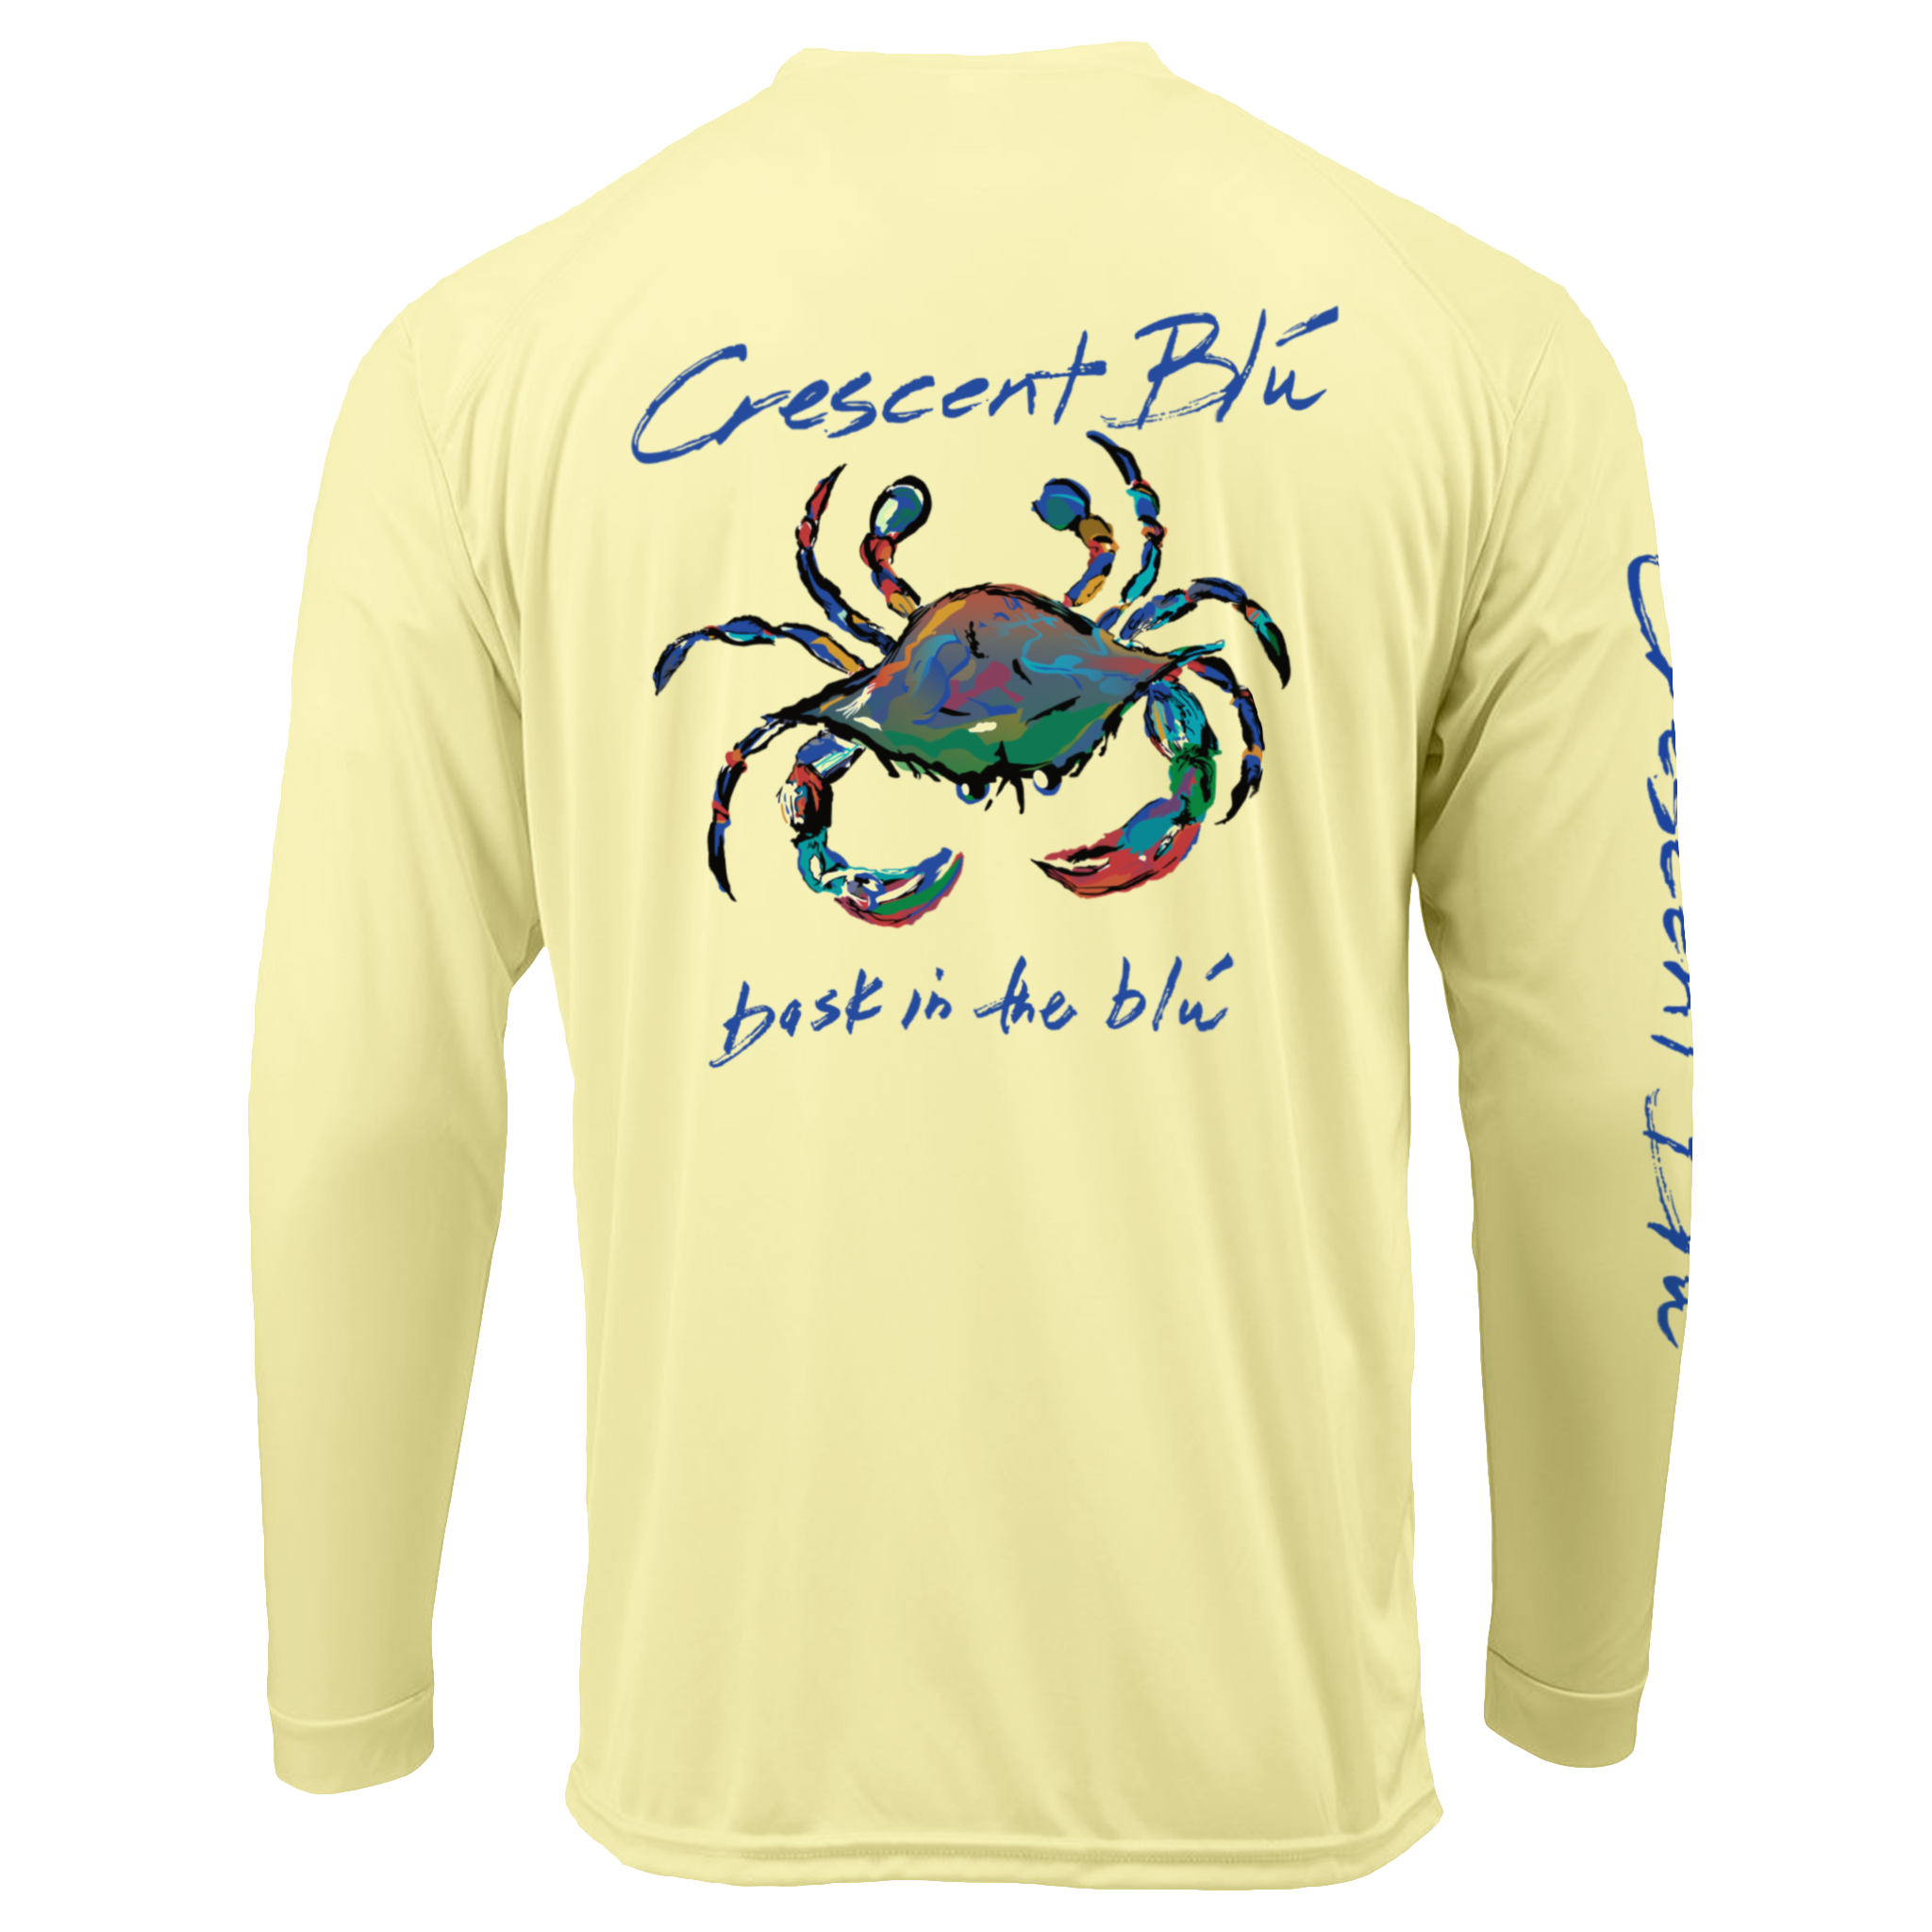 View of back of adult long sleeve UPF 50+ sun shirt with large multicolored crab logo 